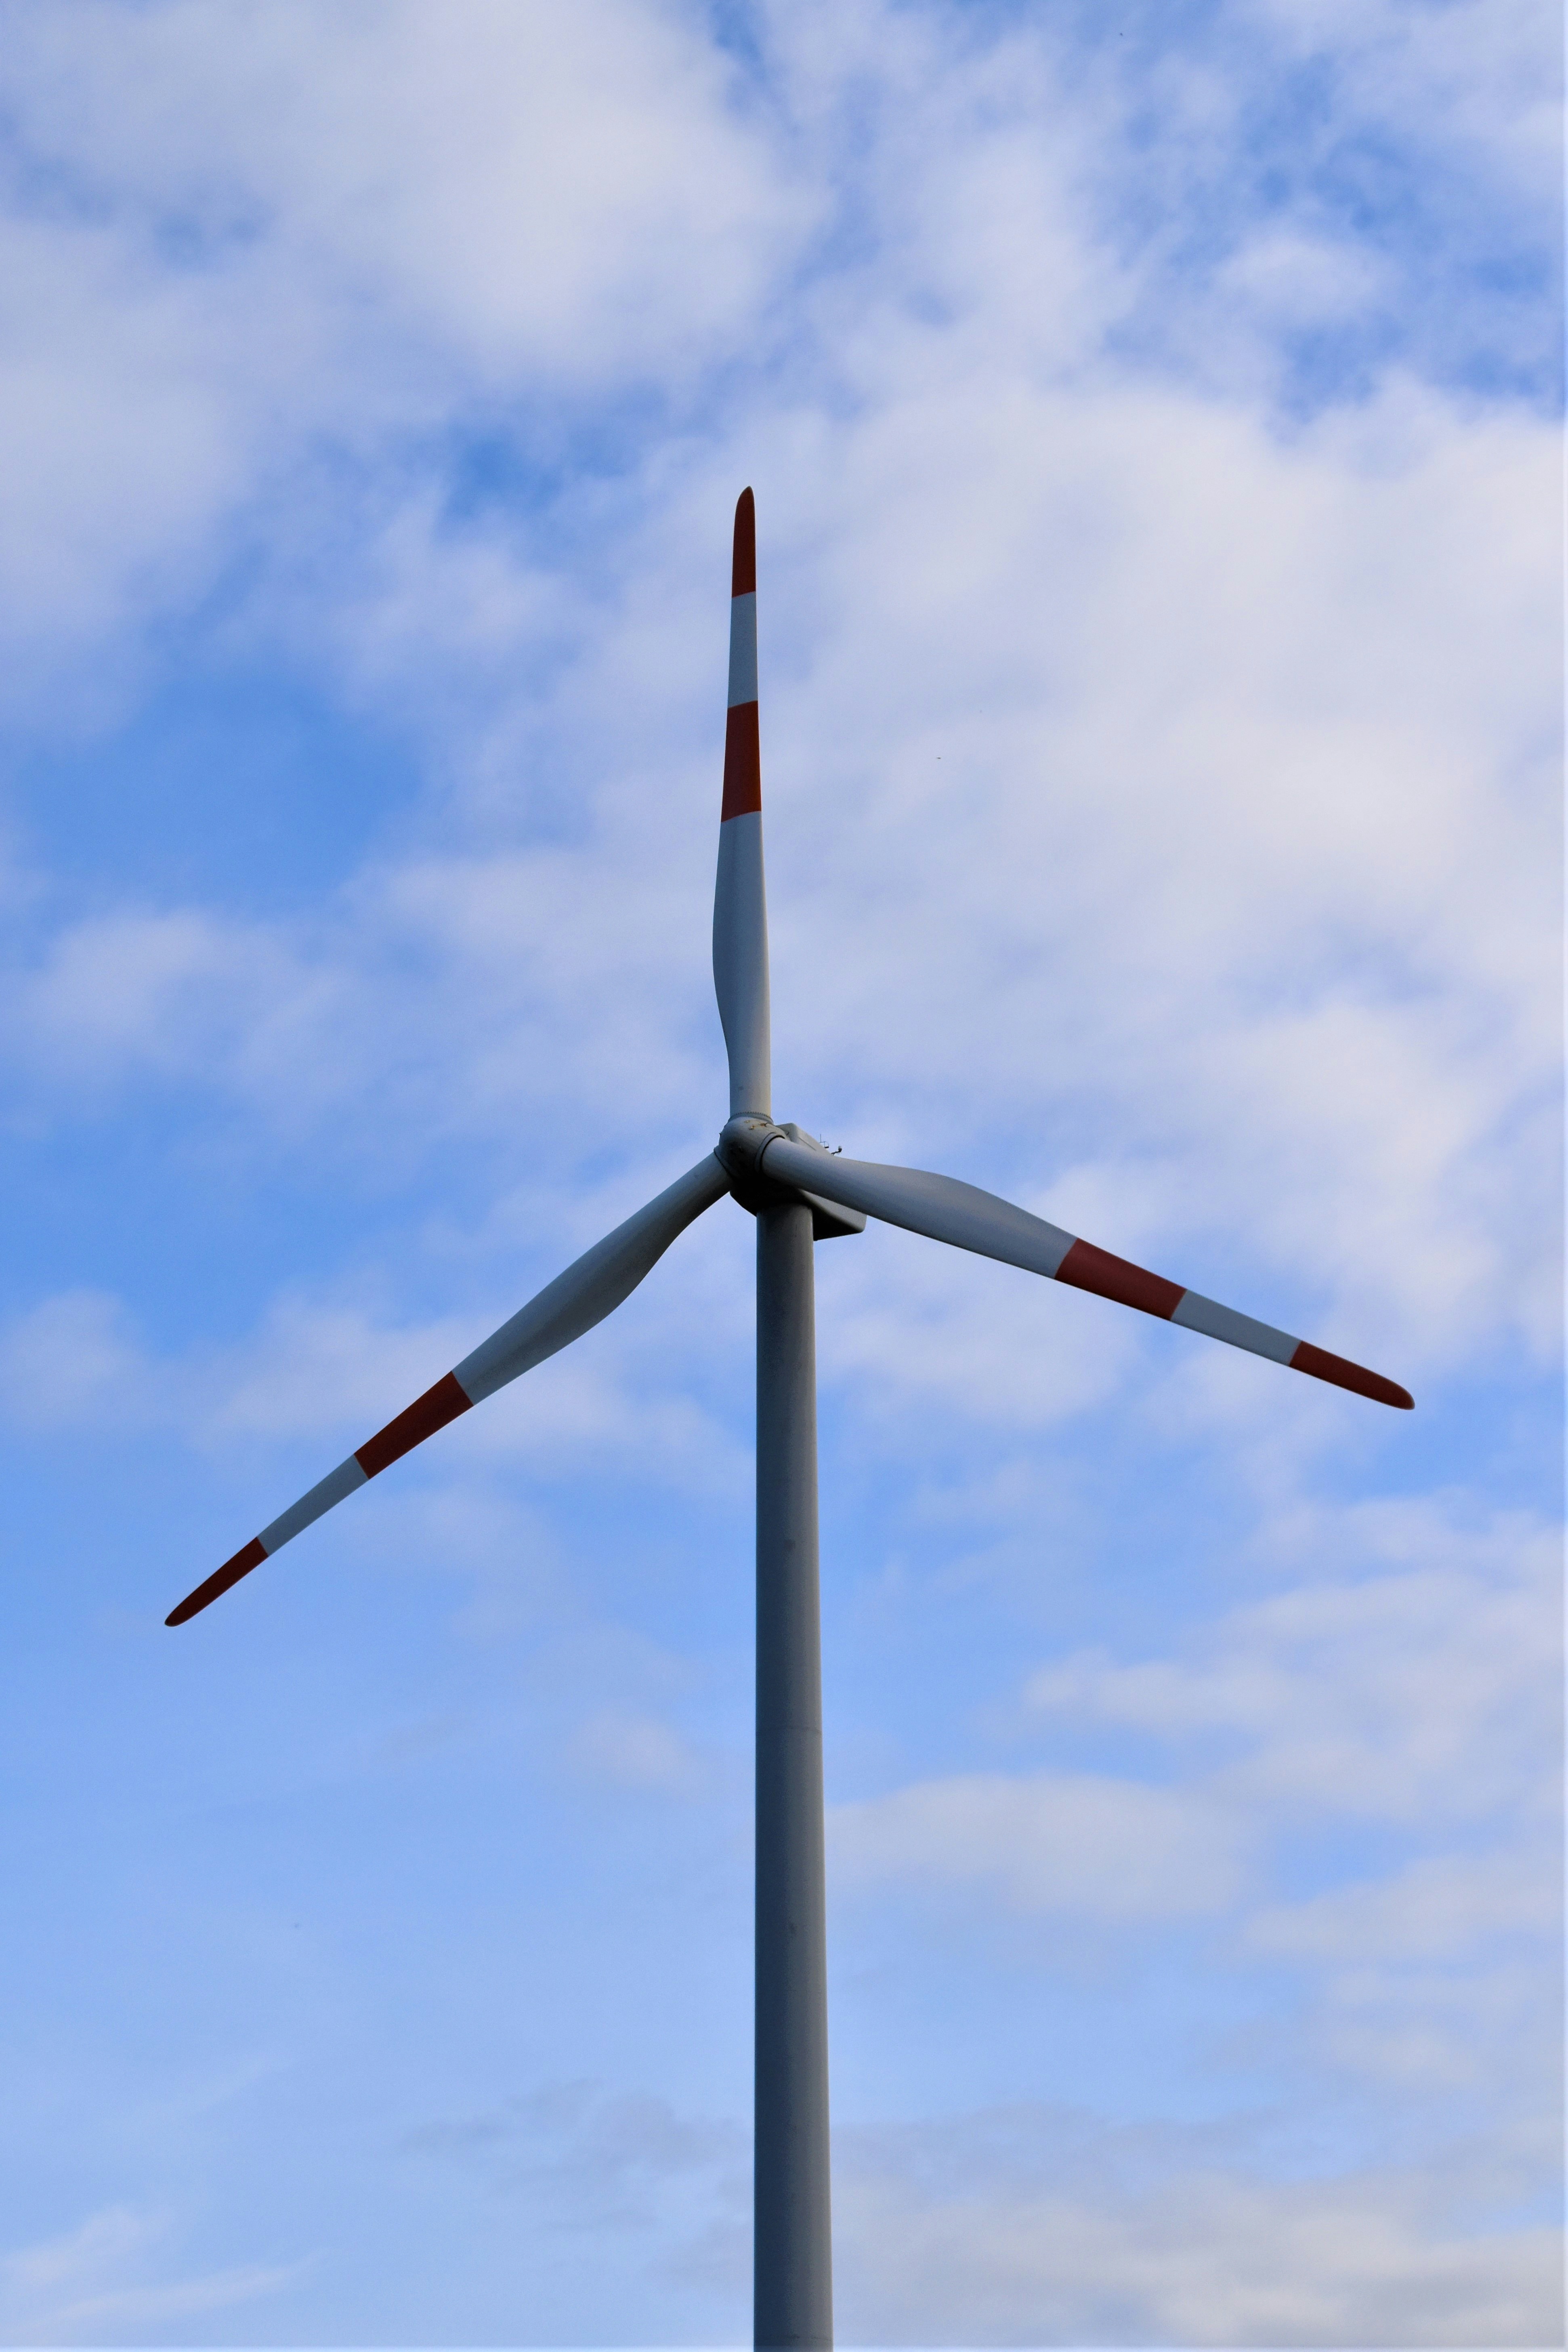 A lonely wind turbine in the blue sky